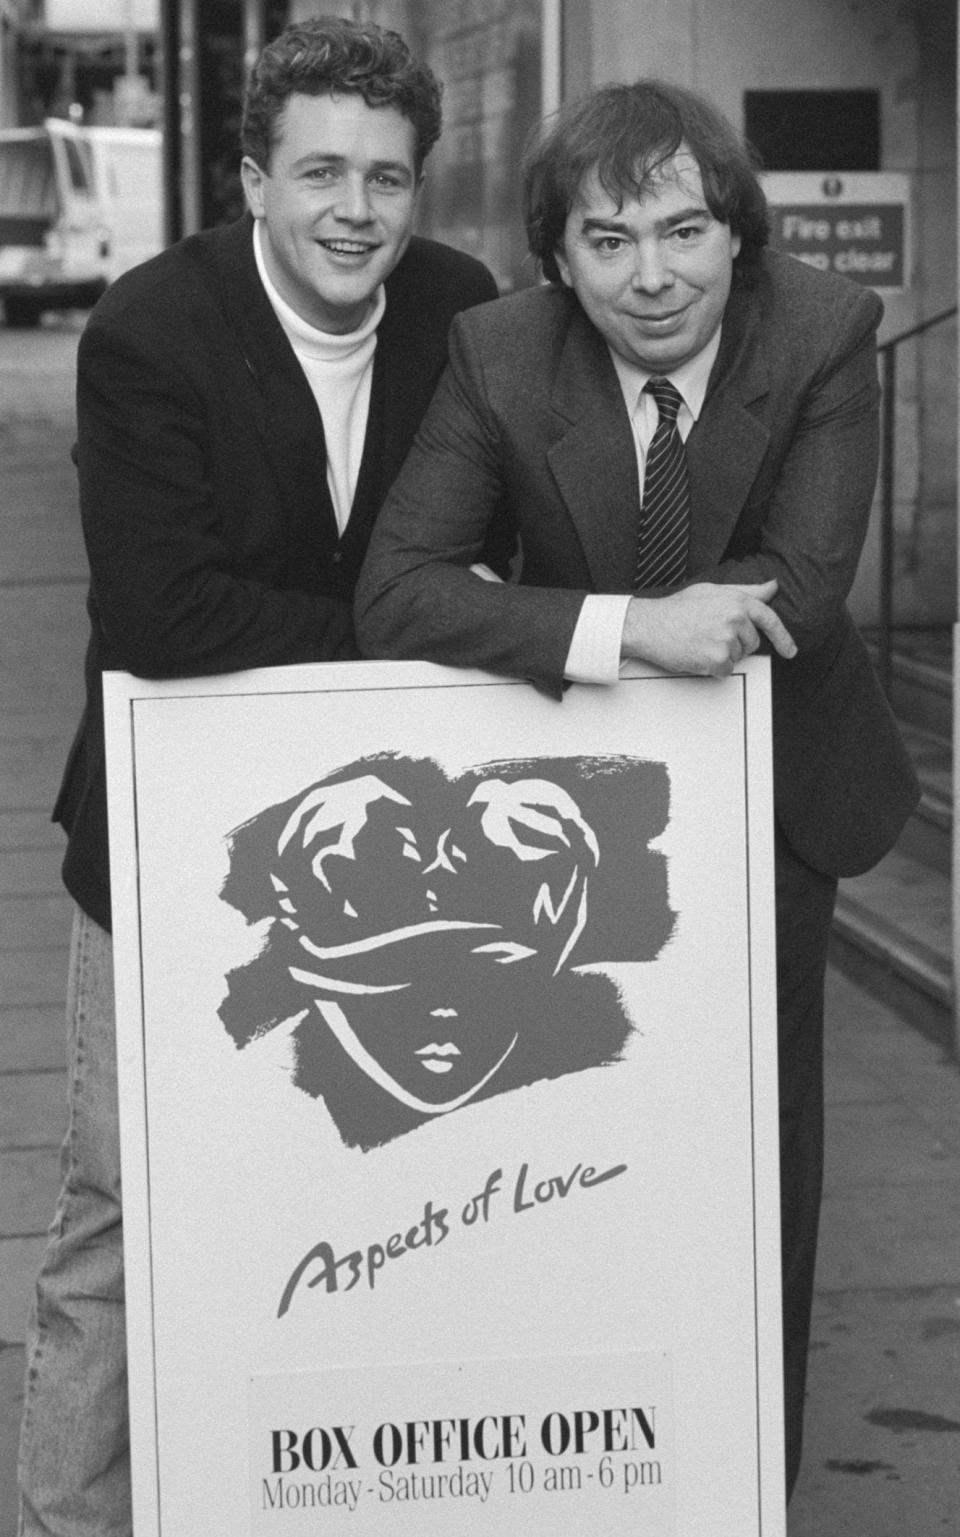 Michael Ball with composer Andrew Lloyd Webber in 1988 at Aspects Of Love at the Prince of Wales Theatre - Hulton Archive